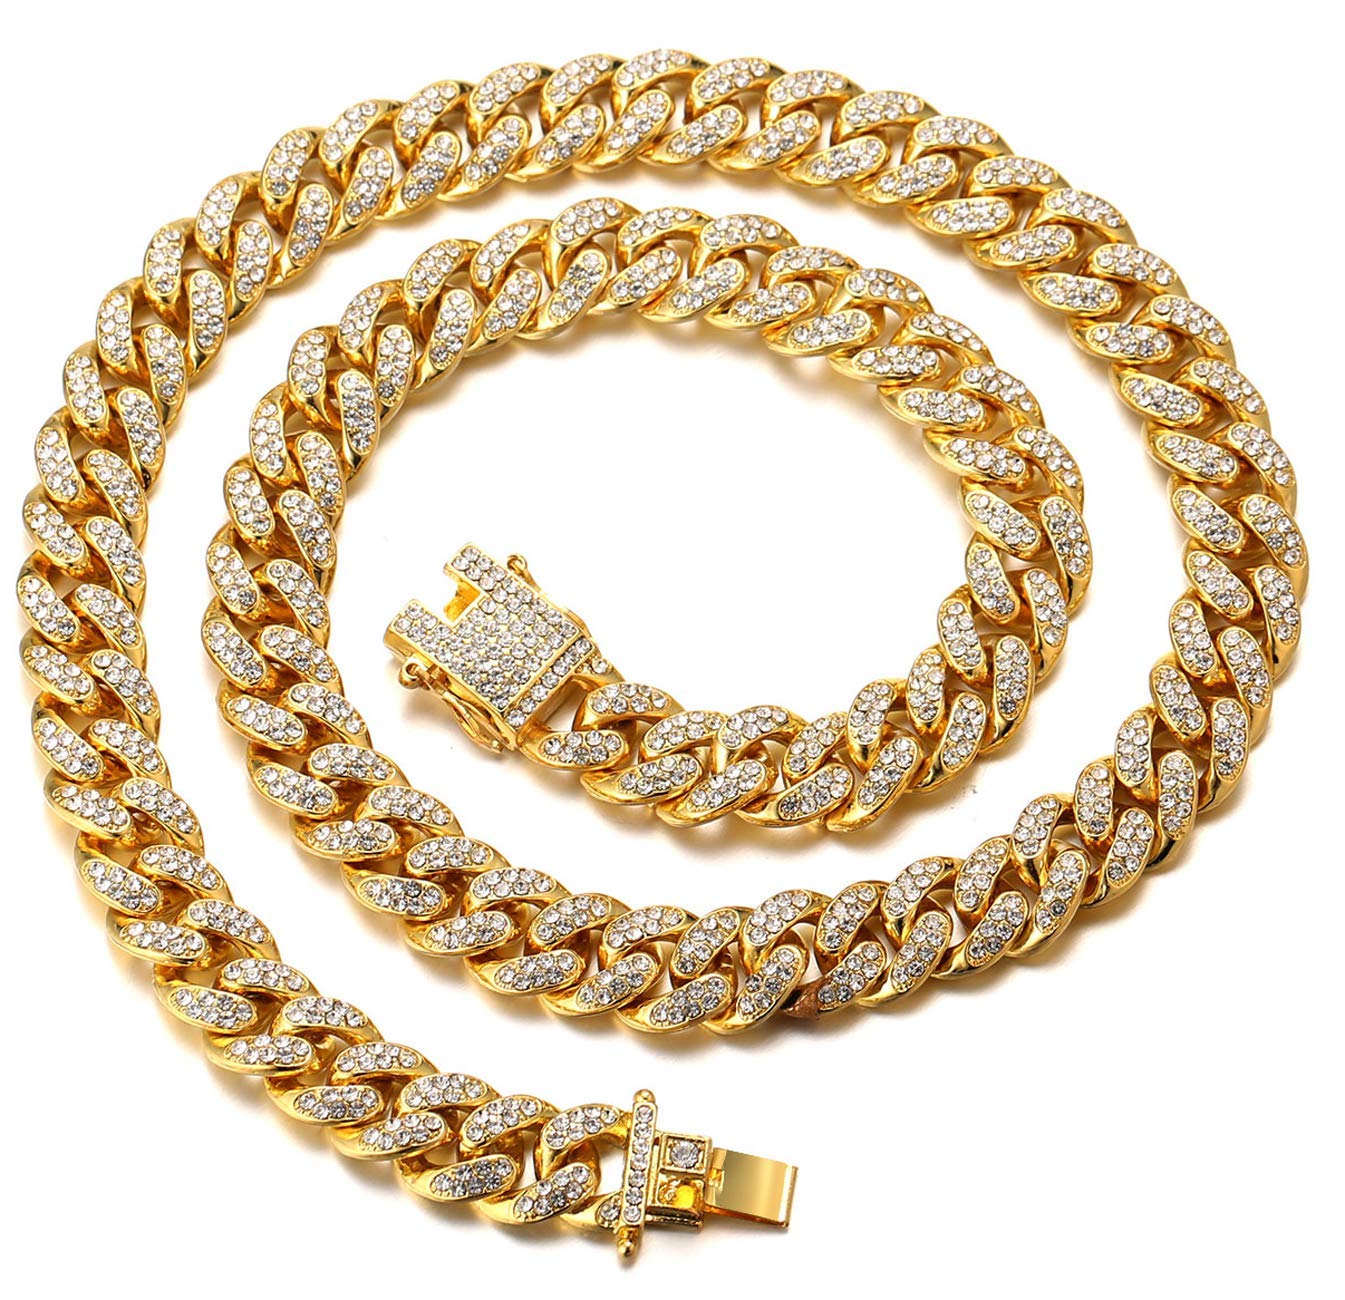 Halukakah Cat Collar - Carat - Iced Out Diamond Cuban Link Gold Chain for Cats & Kittens - Platinum Plated 7" Collar Size - for Decoration Only - Get Your Cat Catwalk Ready